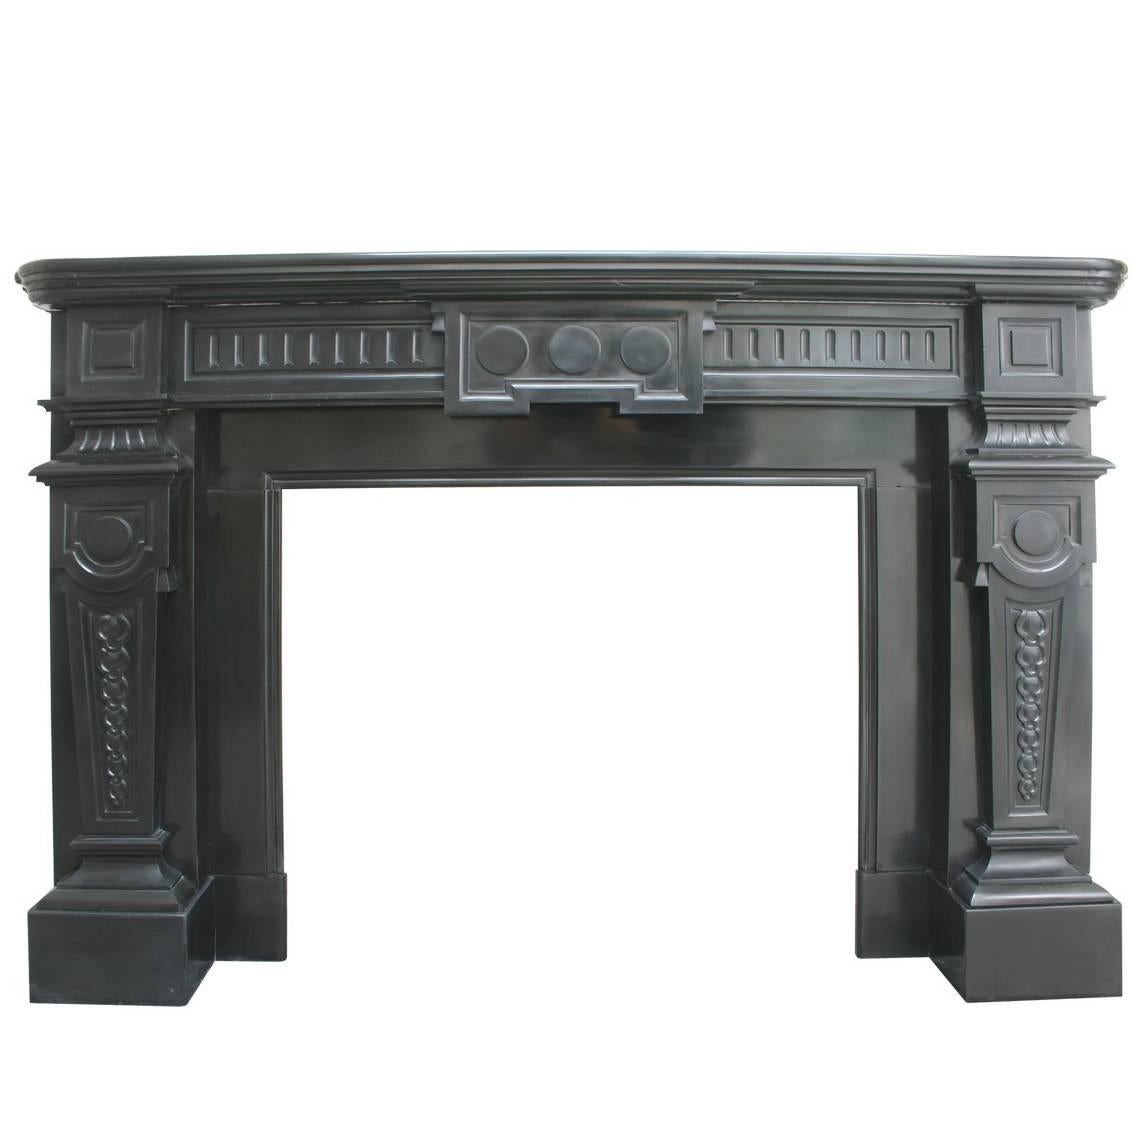 Antique 19th Century Continental Black Marble Fire Surround